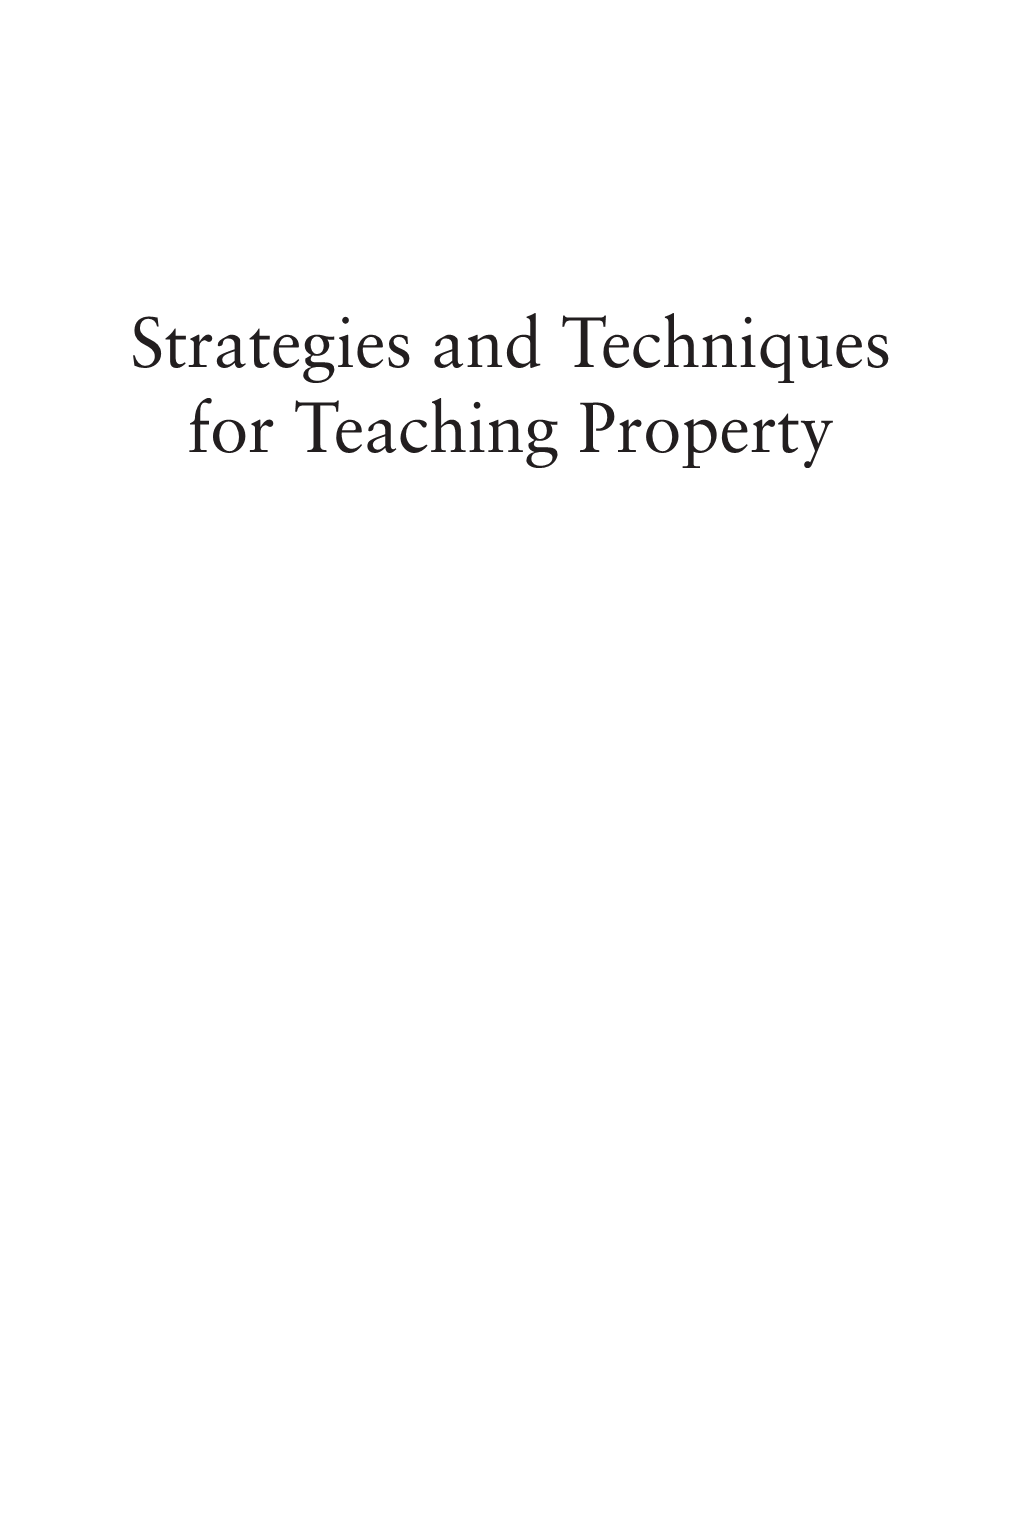 Strategies and Techniques for Teaching Property EDITORIAL ADVISORS